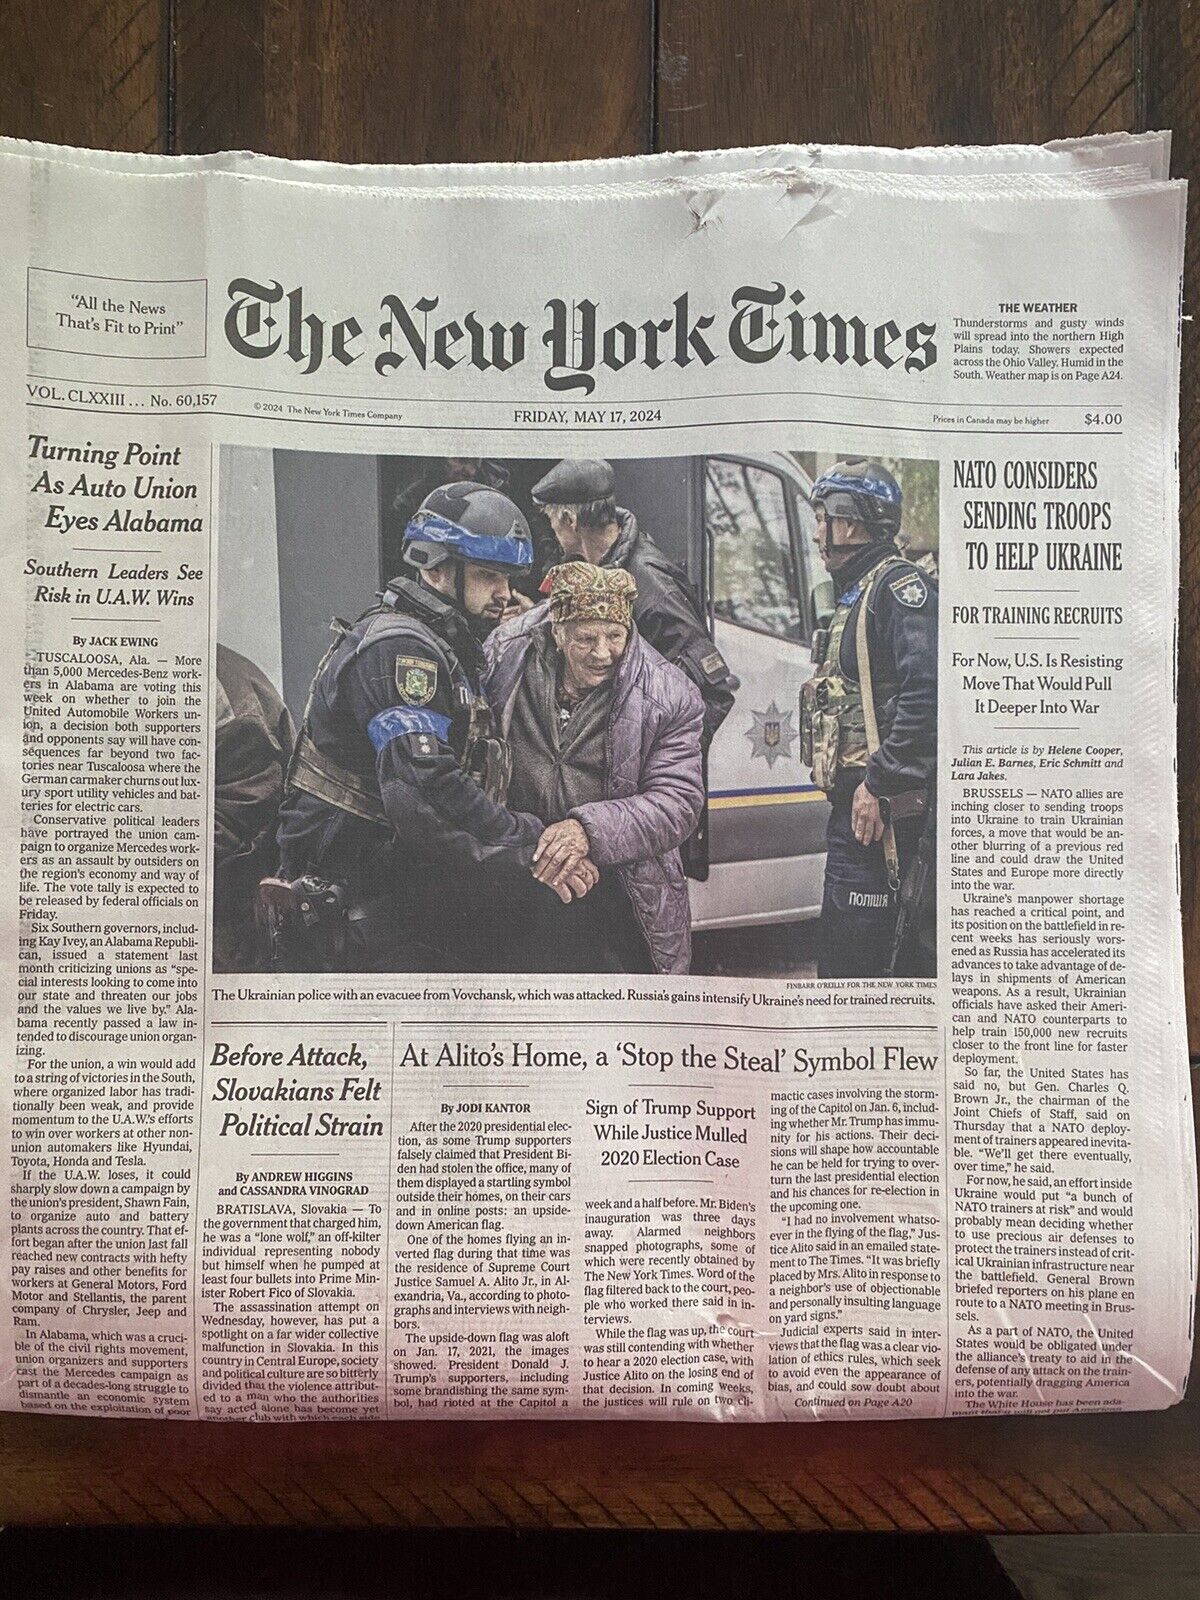 The New York Times Friday, May 17, 2024 Complete Print Newspaper (NEW)